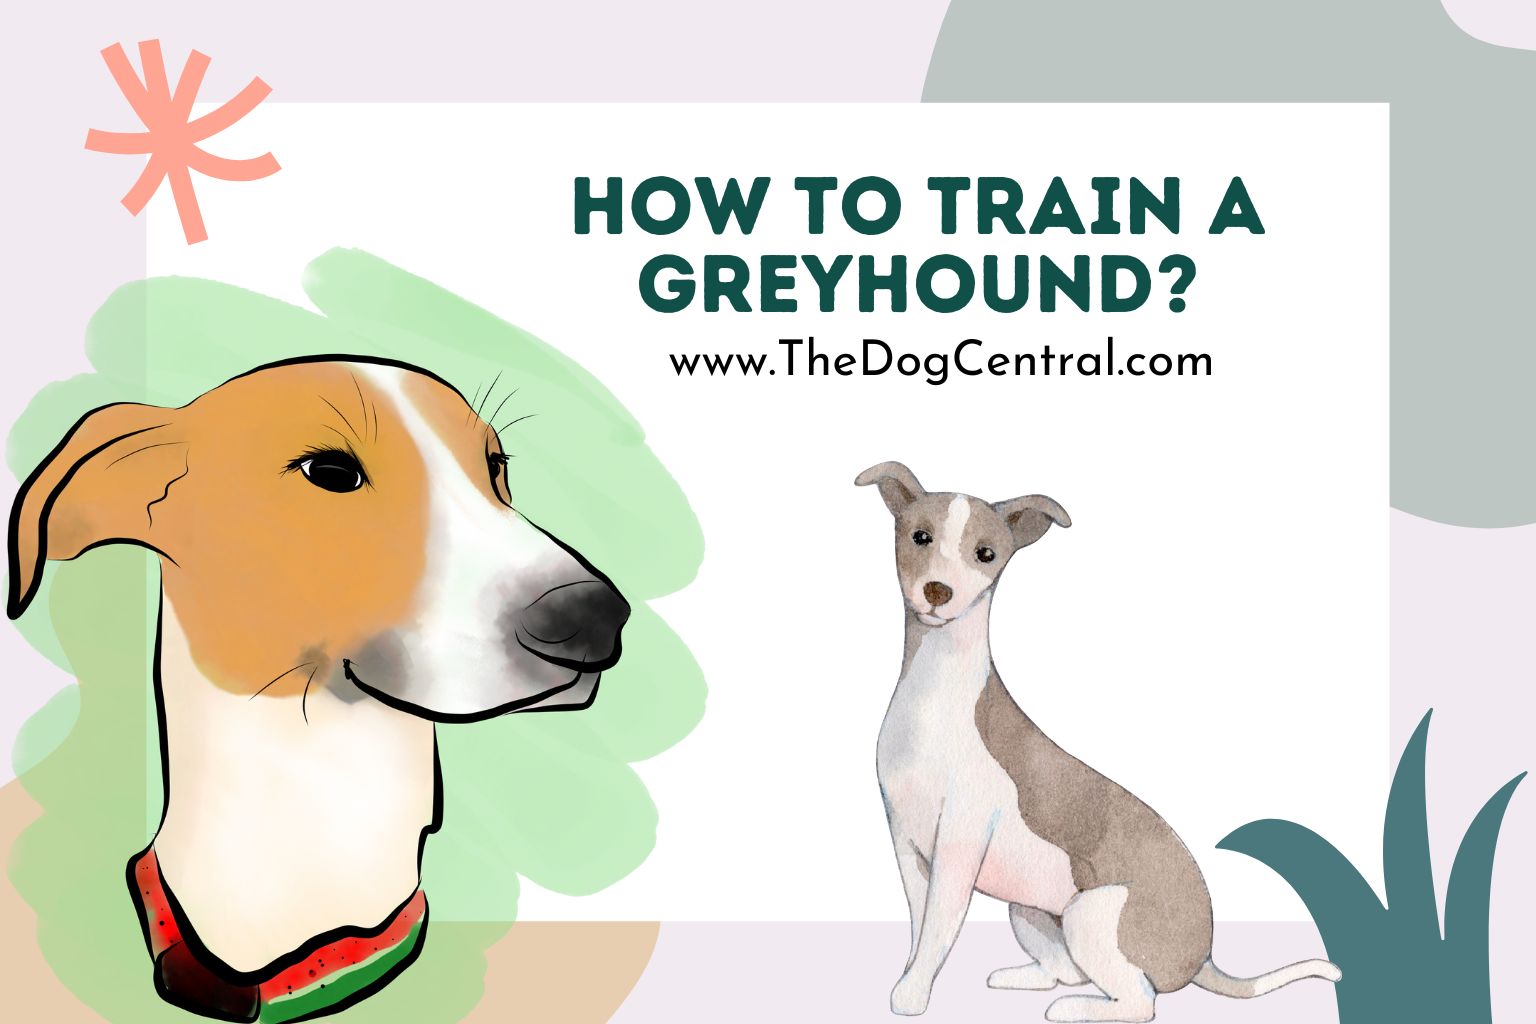 How to Train a Greyhound